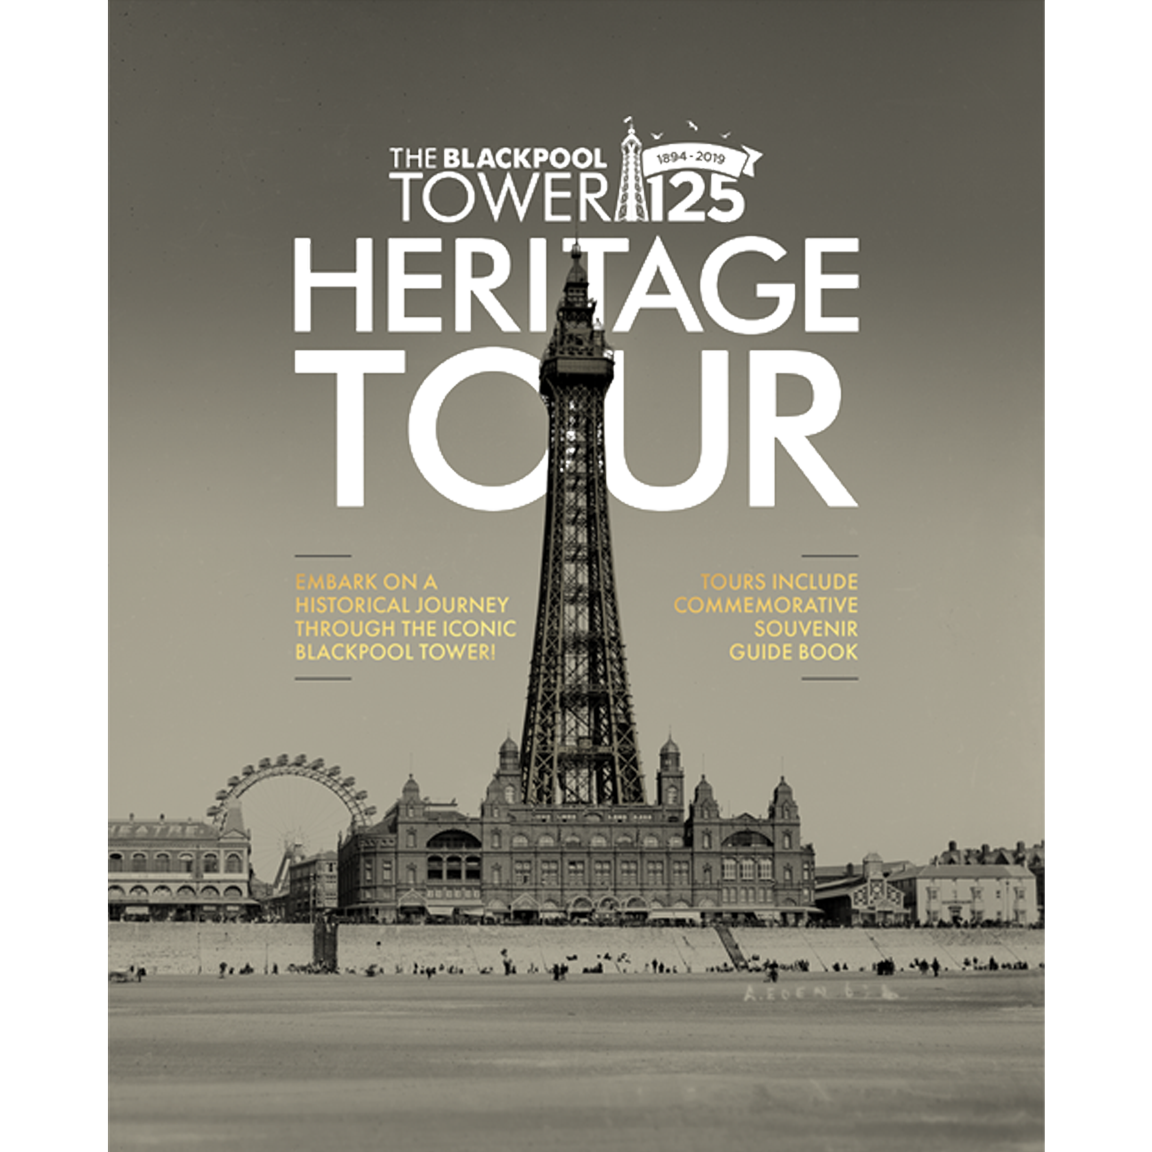 History & Heritage of The Blackpool Tower